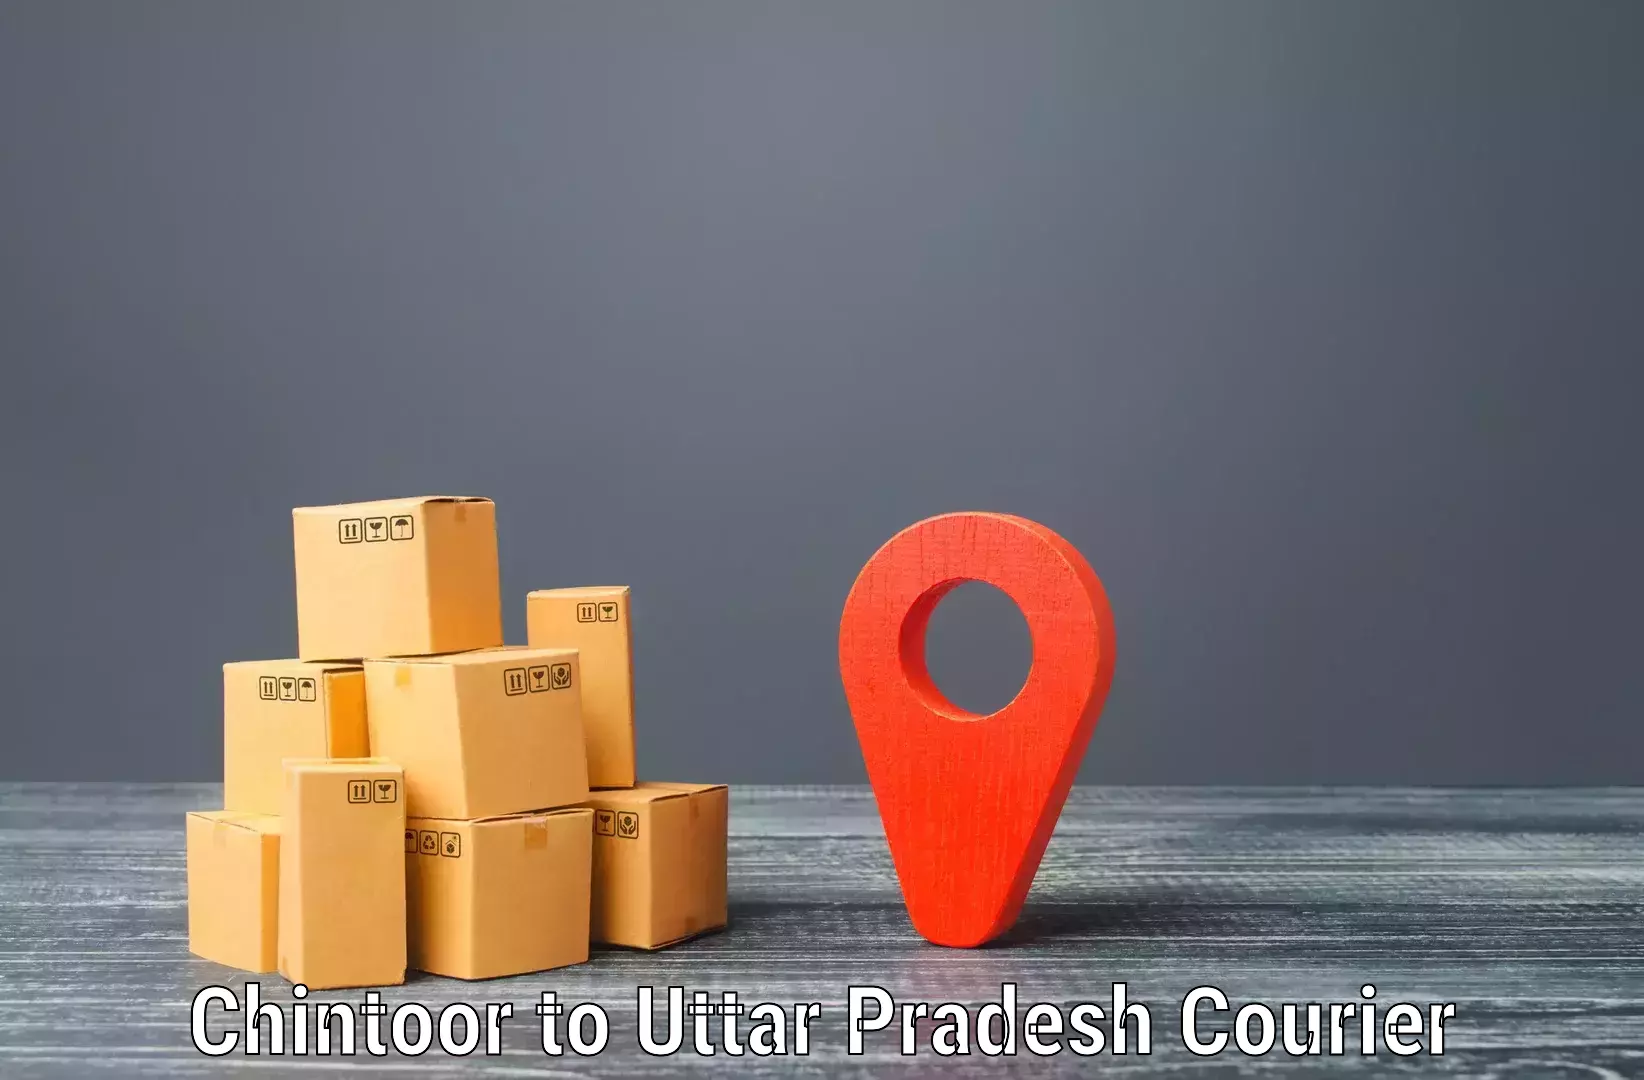 Nationwide parcel services Chintoor to Mirzapur